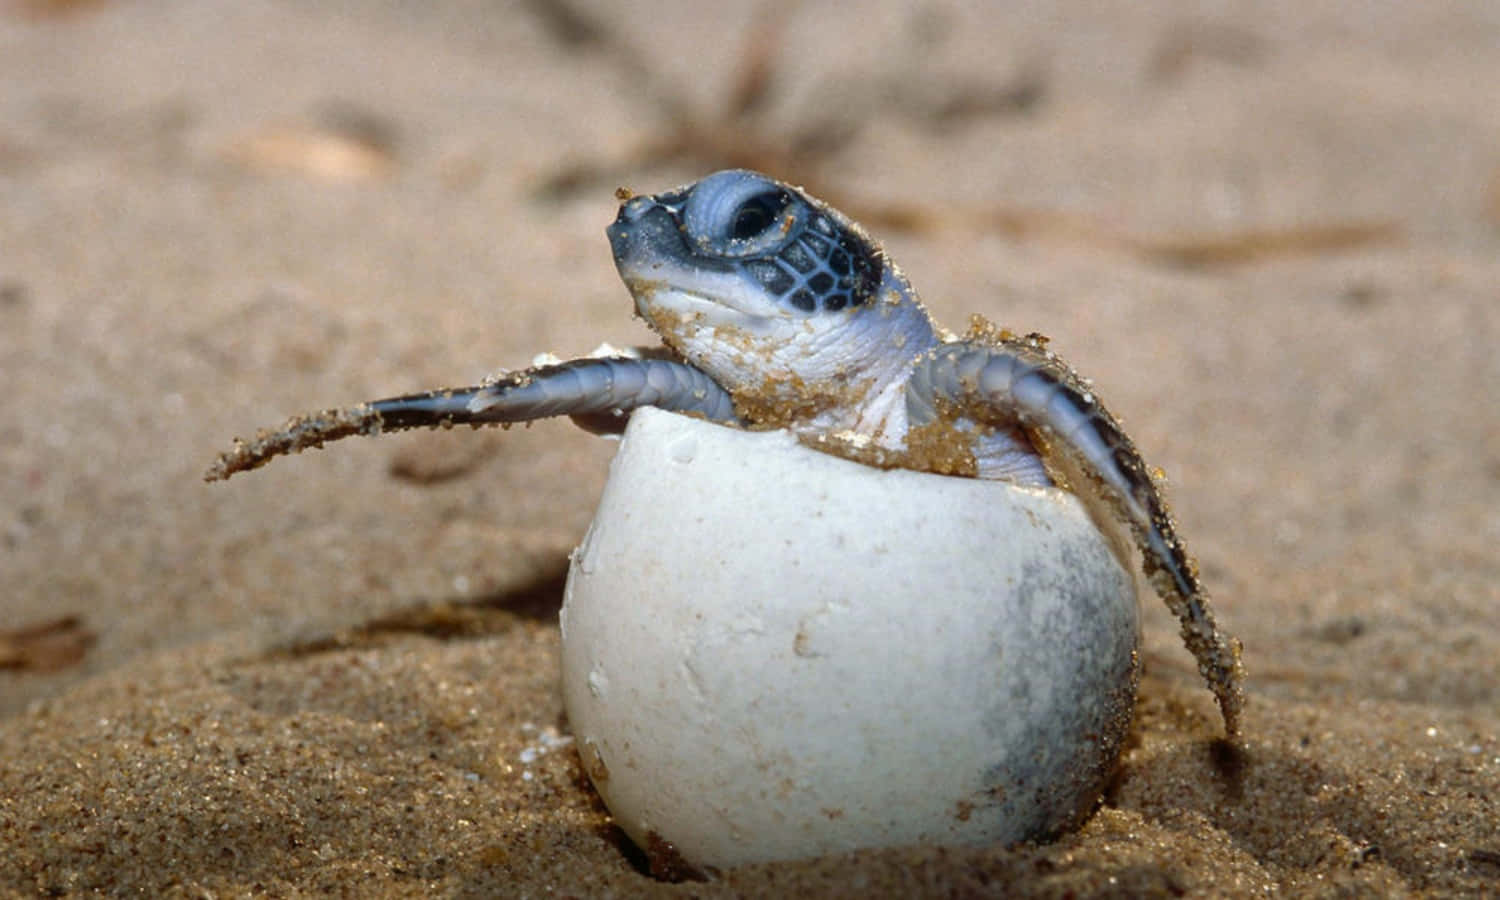 Need Something Cute? Check Out This Adorable Little Turtle!